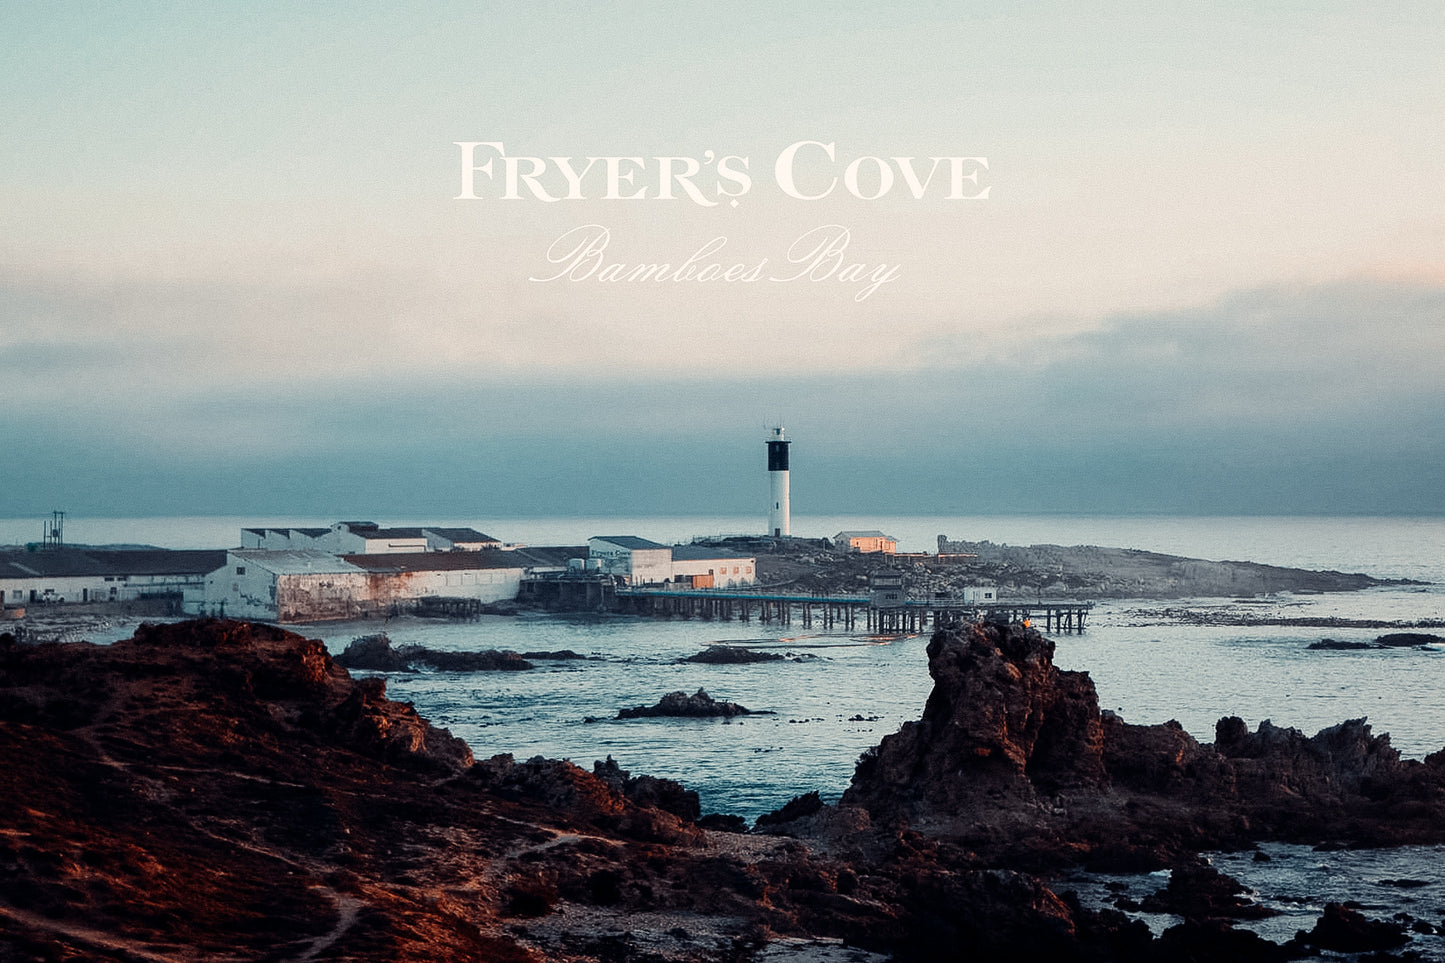 Fryer’s Cove: New Producer specialising in Sauvignon Blanc